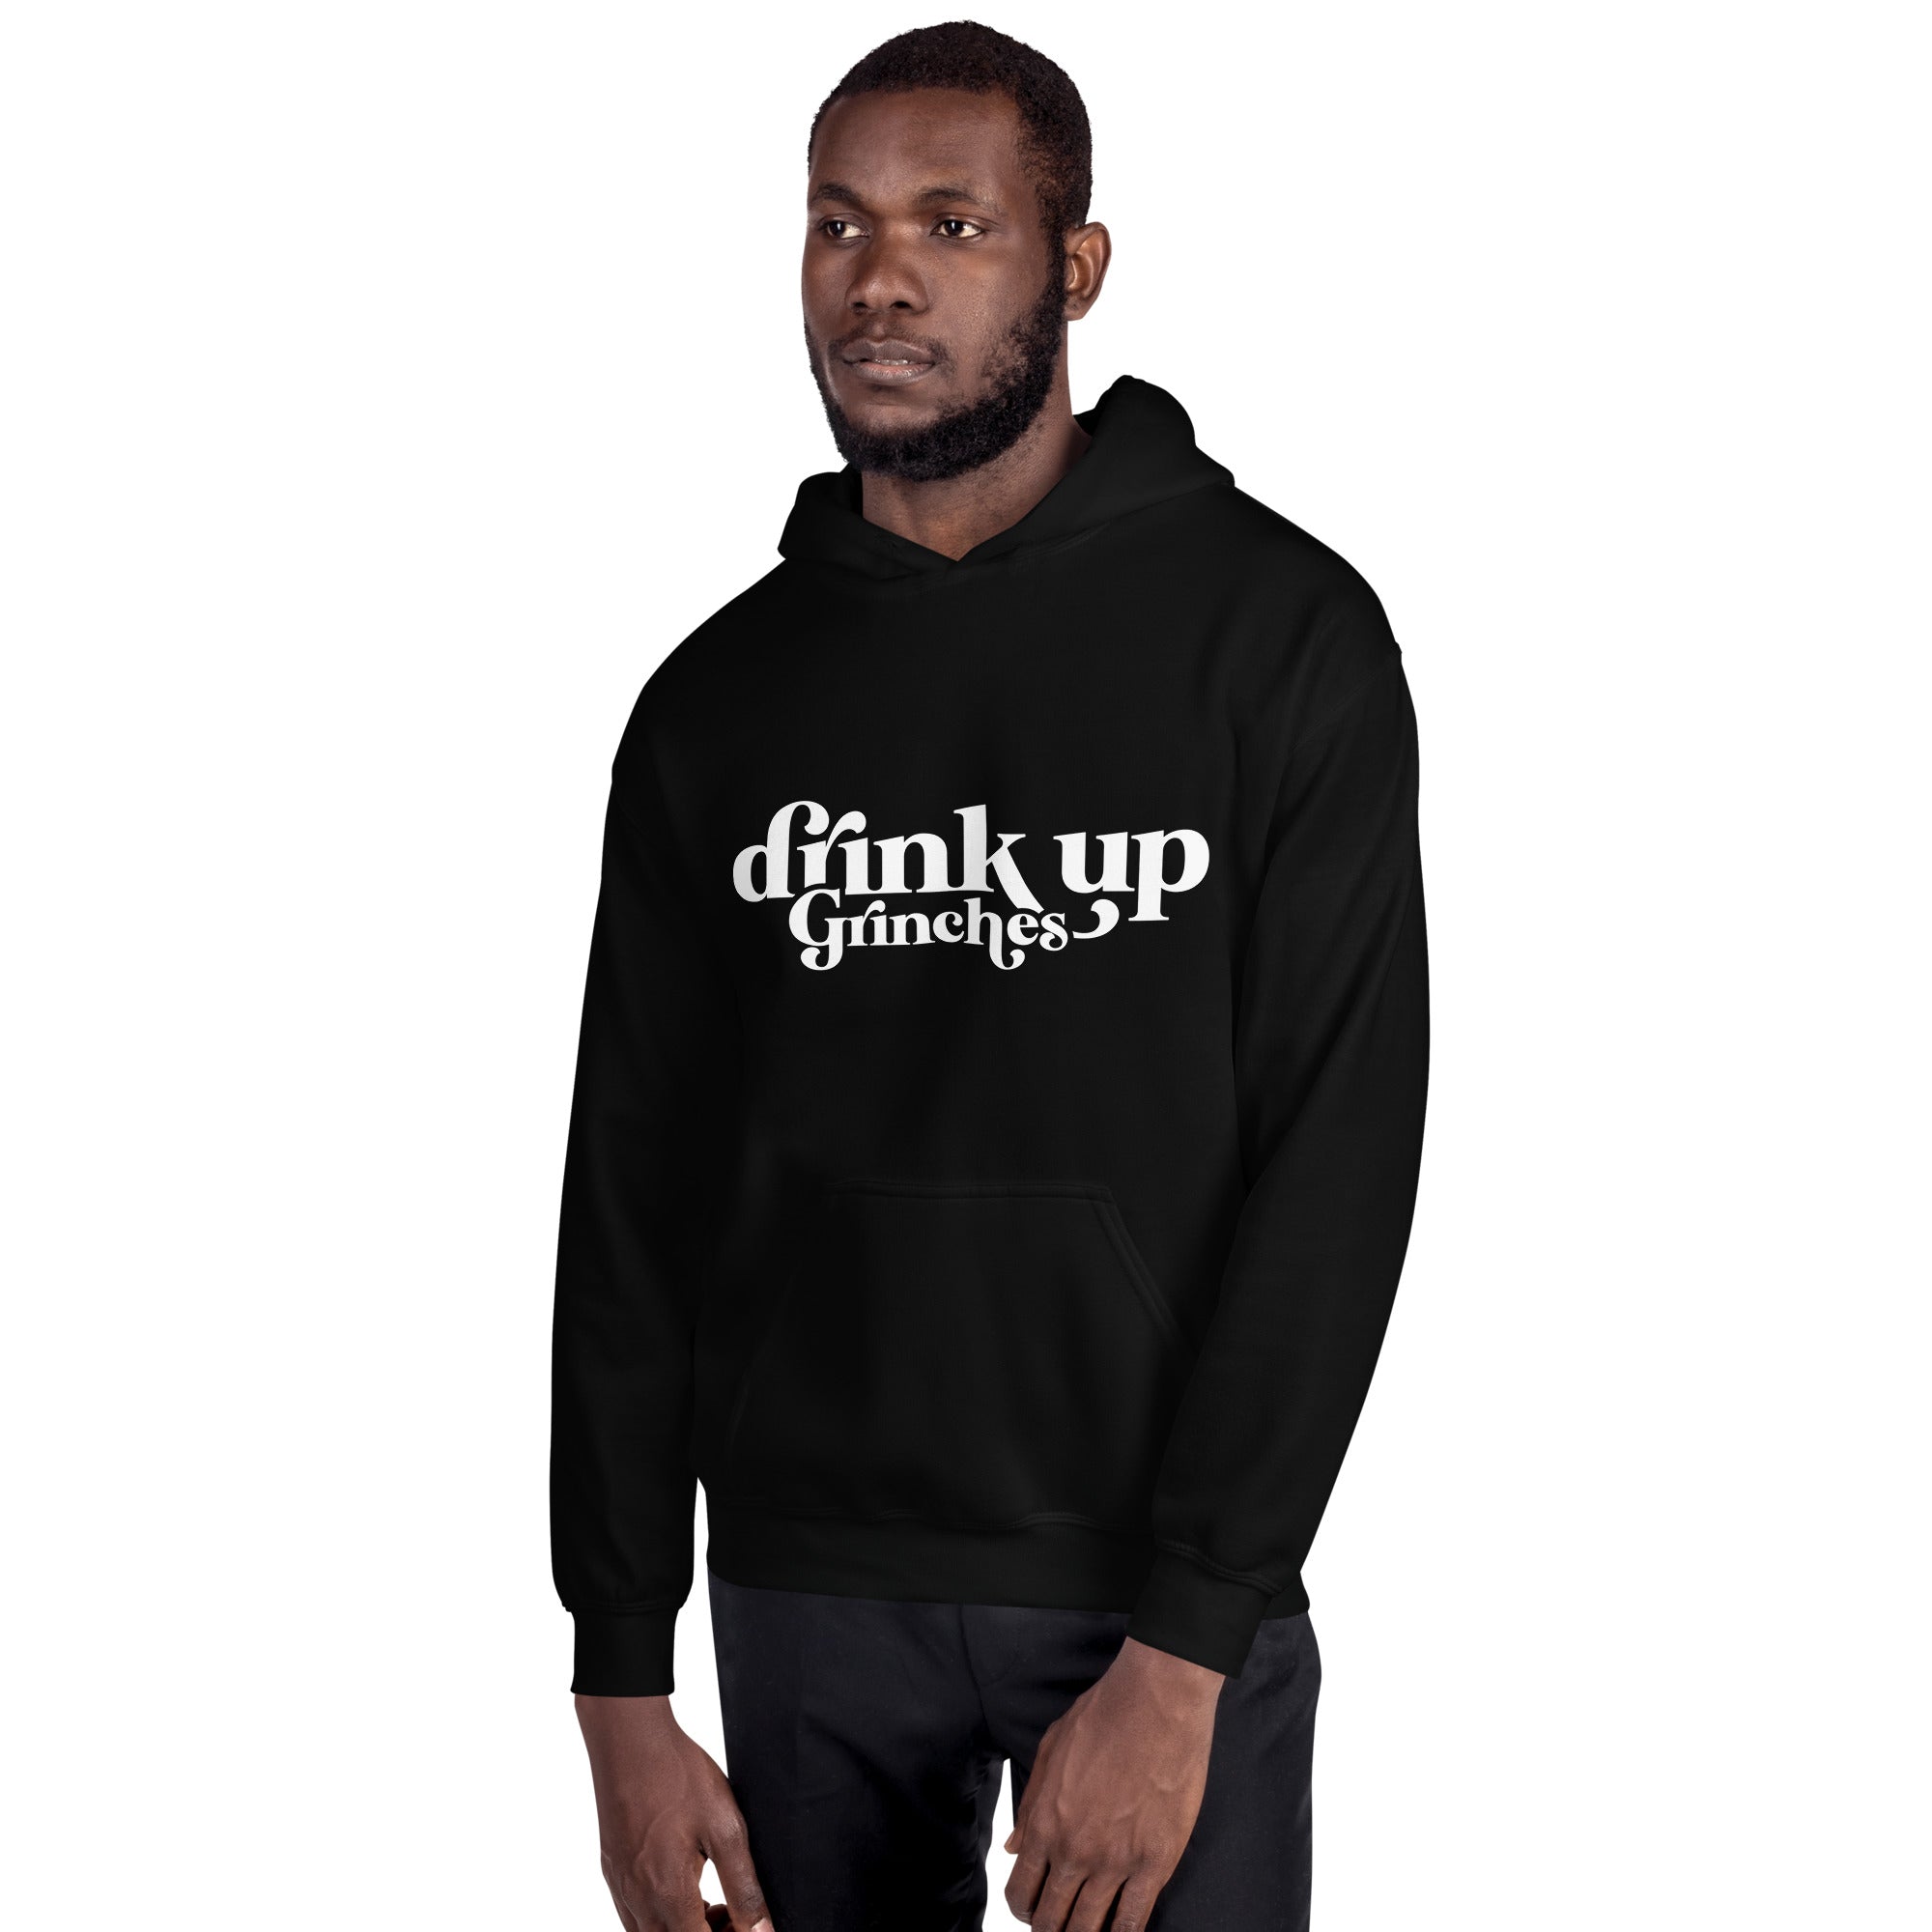 Drink Up Grinches - Unisex Hoodie